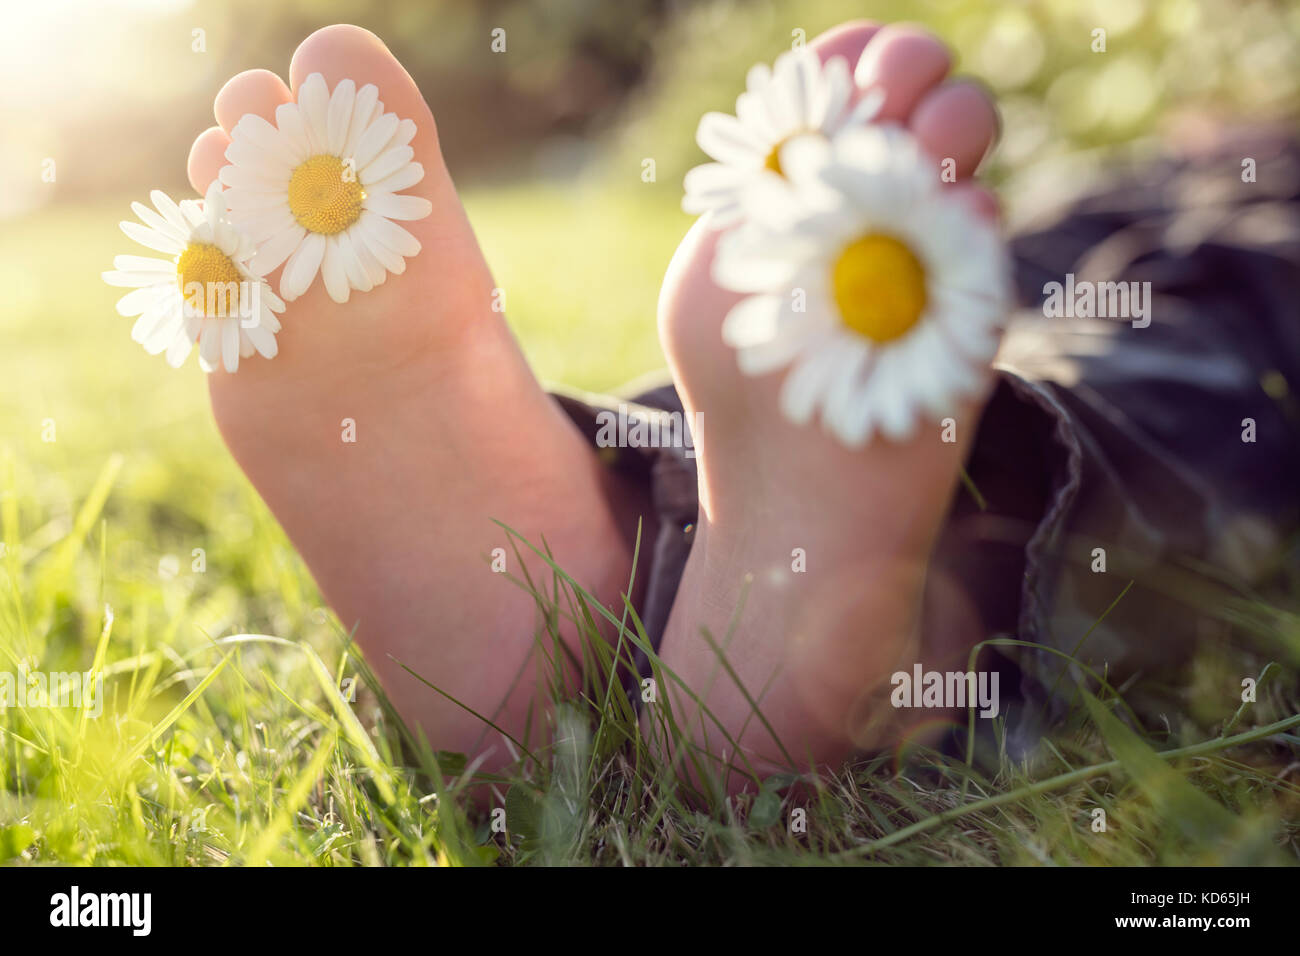 Child with daisy between toes lying in meadow relaxing in summer sunshine Stock Photo